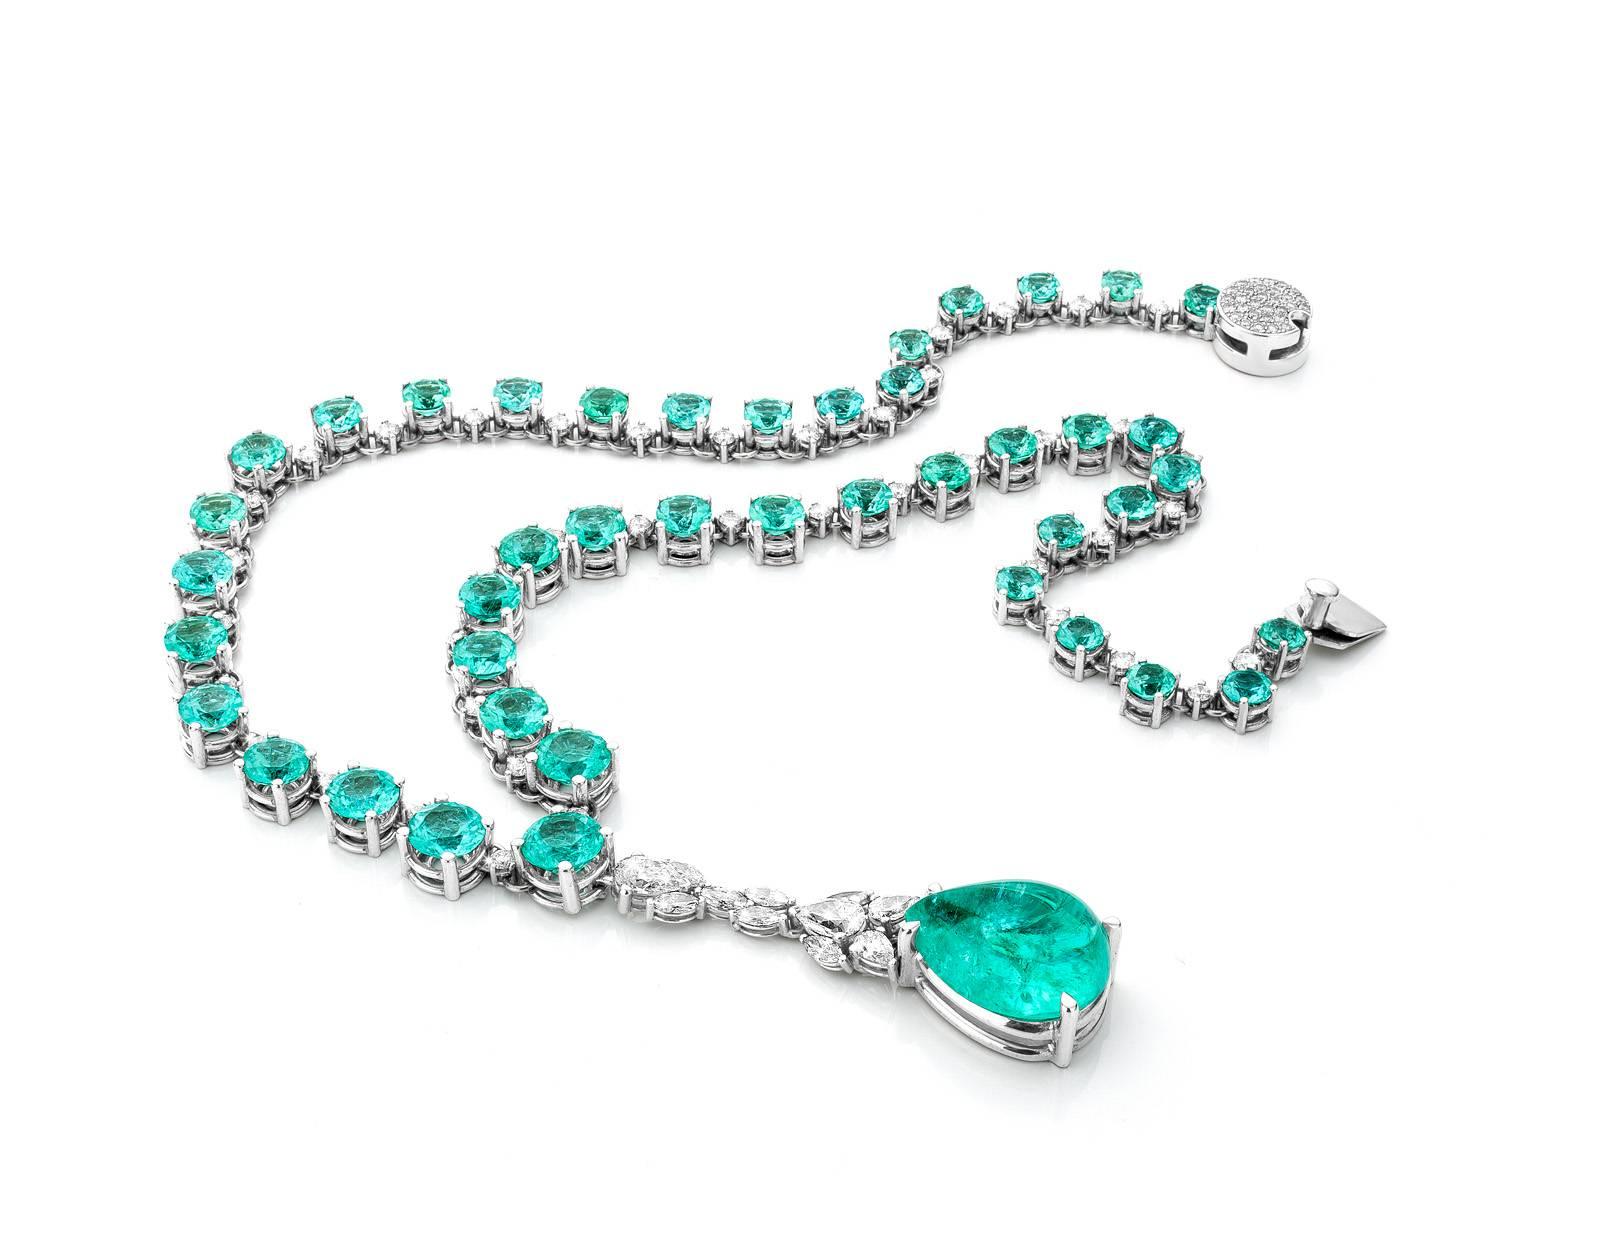 This one of a kind necklace made out of eighteen karat white gold is set 43 brilliant cut paraiba tourmalines weighing 34,83 carat and 42 diamonds weighing 2,49 carat. The detachable pendant is made out of 11 diamonds weighing 2,49 carat and one